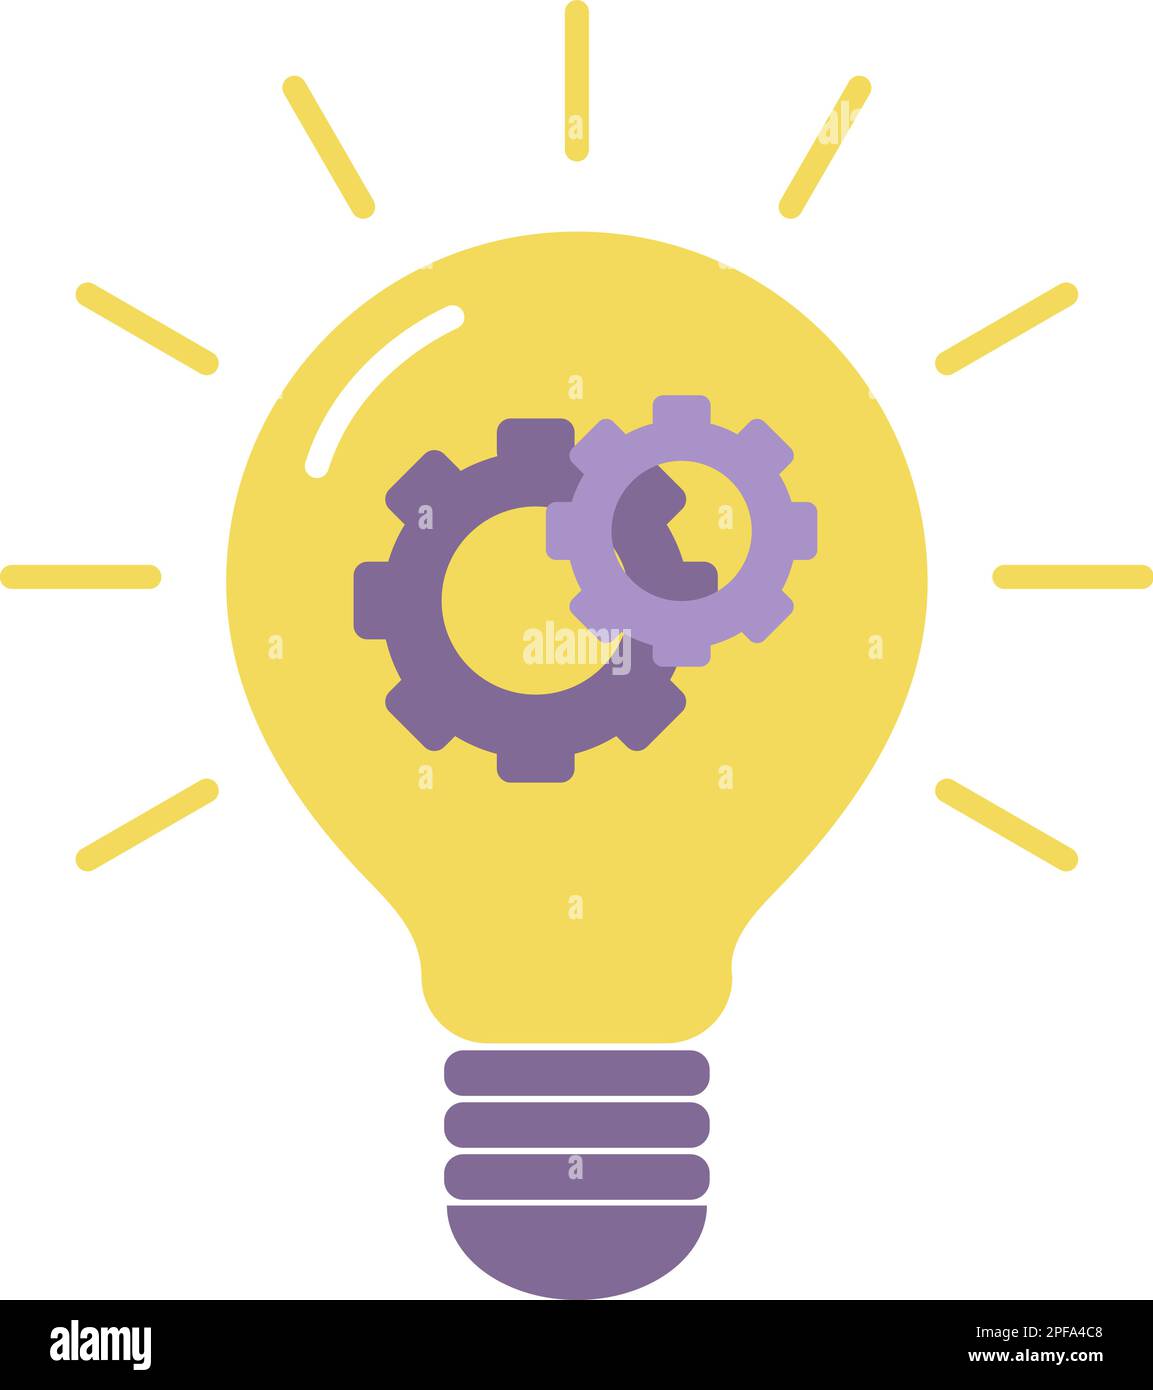 Light bulb with gears inside symbolizes the generation of business ideas. Simple flat icon of an idea, innovation and creativity. Vector art Stock Vector